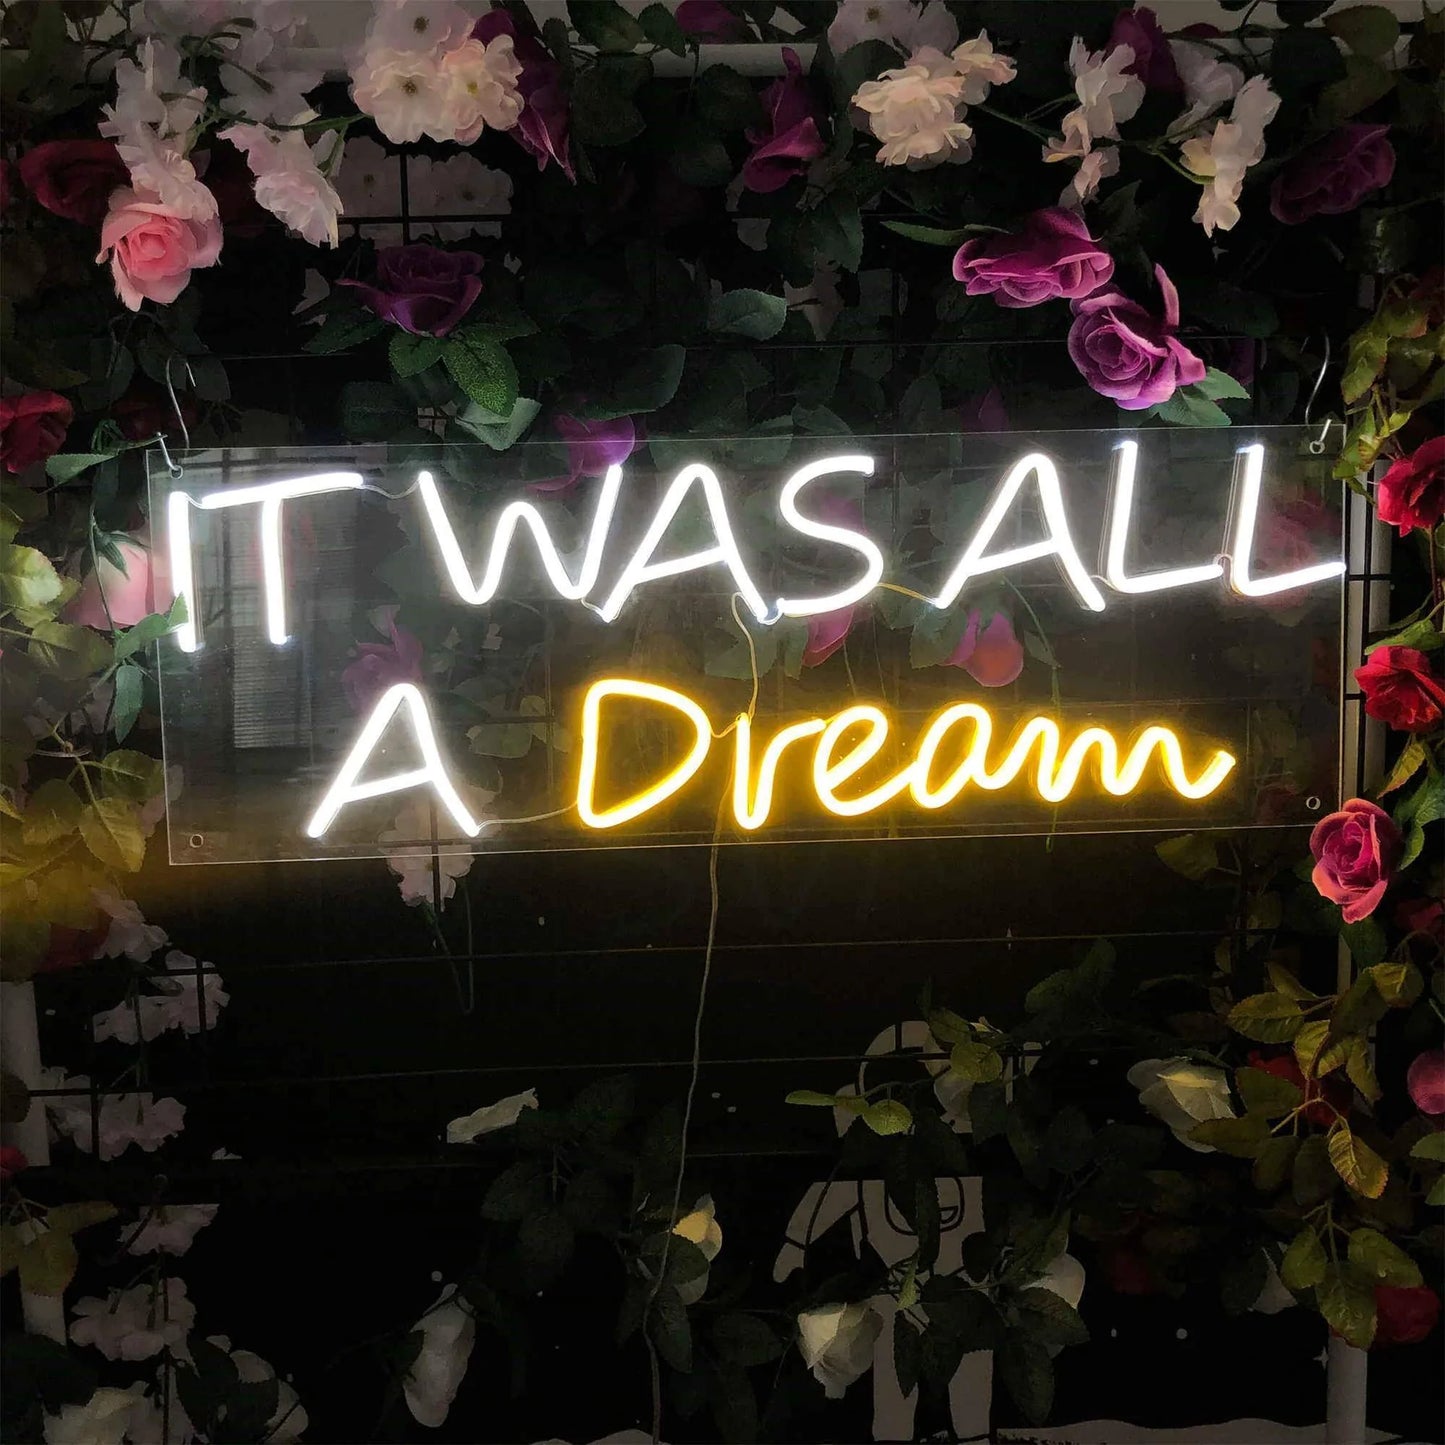 IT WAS ALL A DREAM NEON SIGN ART